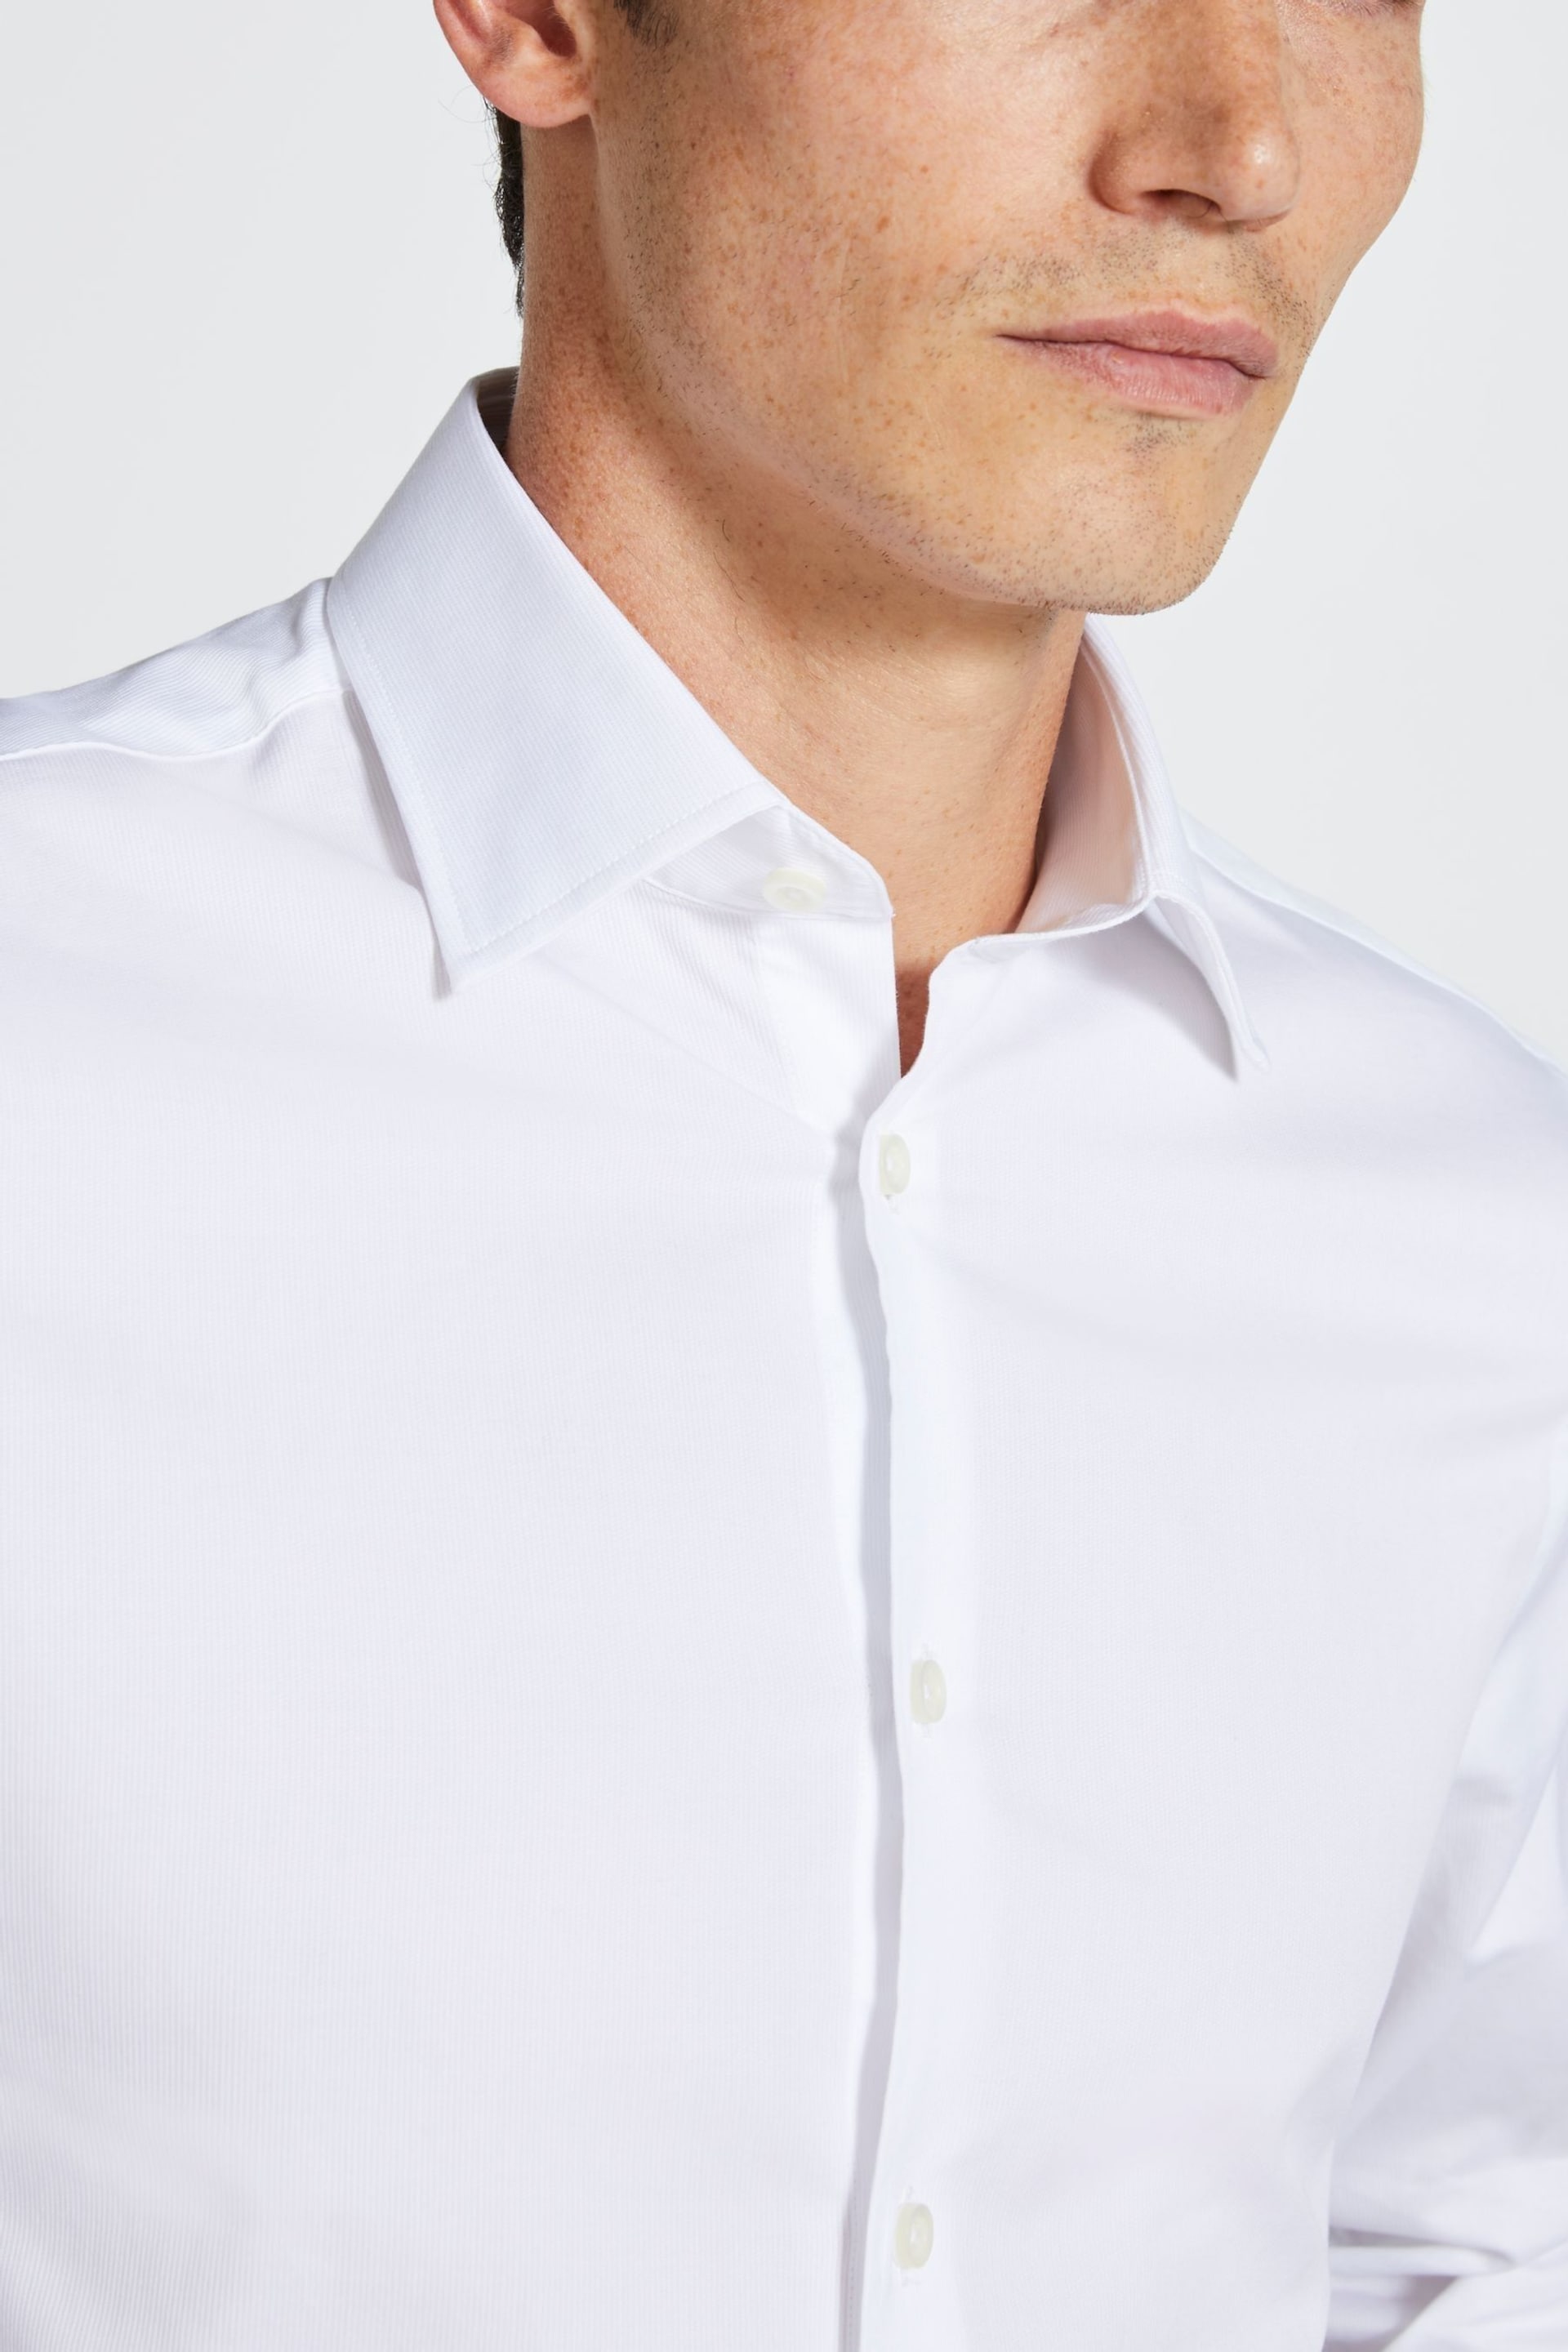 MOSS White Tailored Fit Pique Texture Shirt - Image 2 of 3